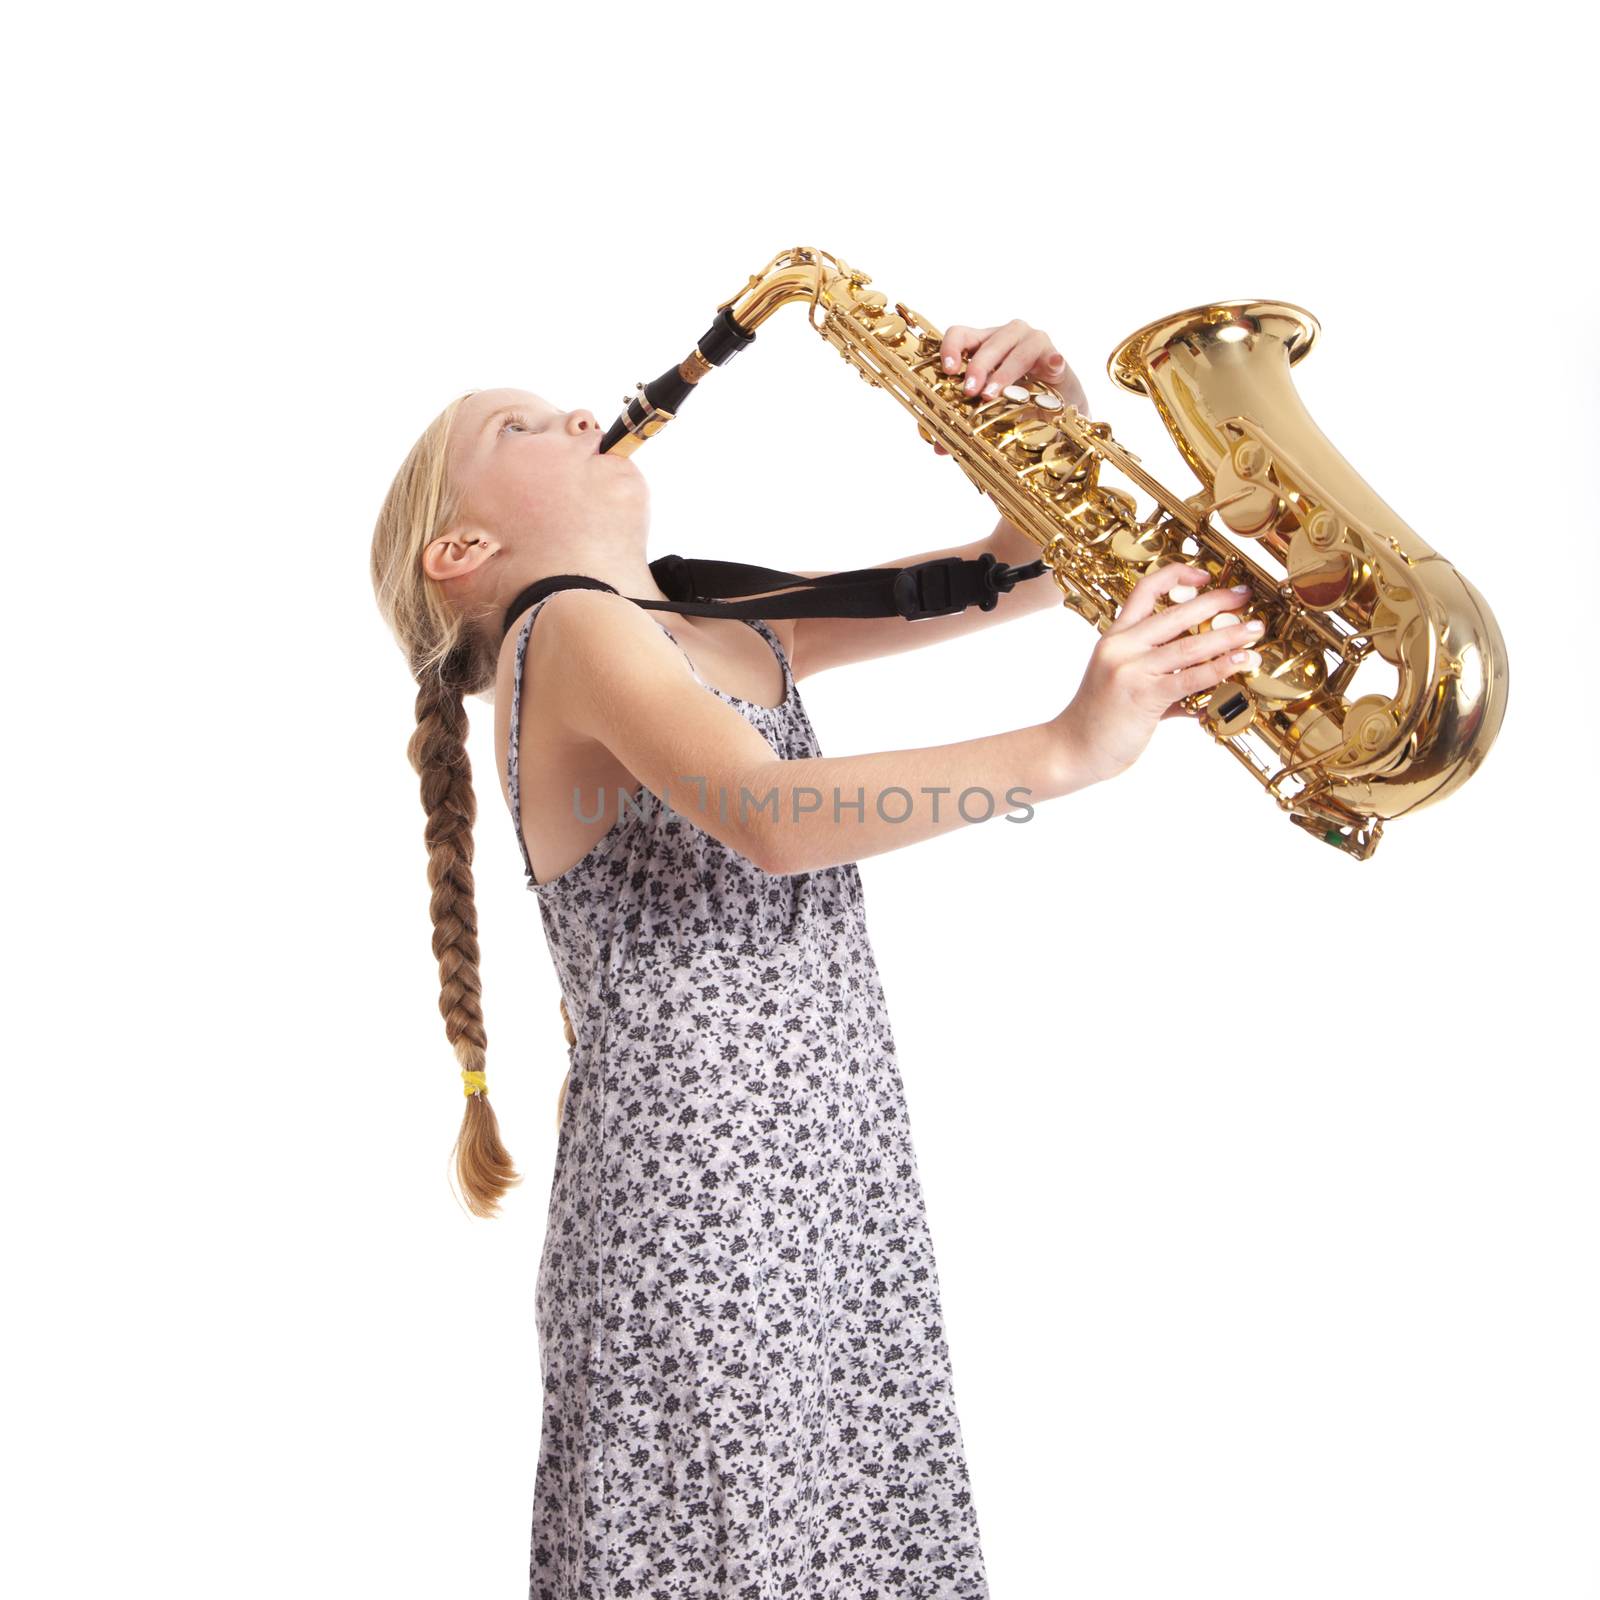 young girl in dress and her saxophone in studio against white background